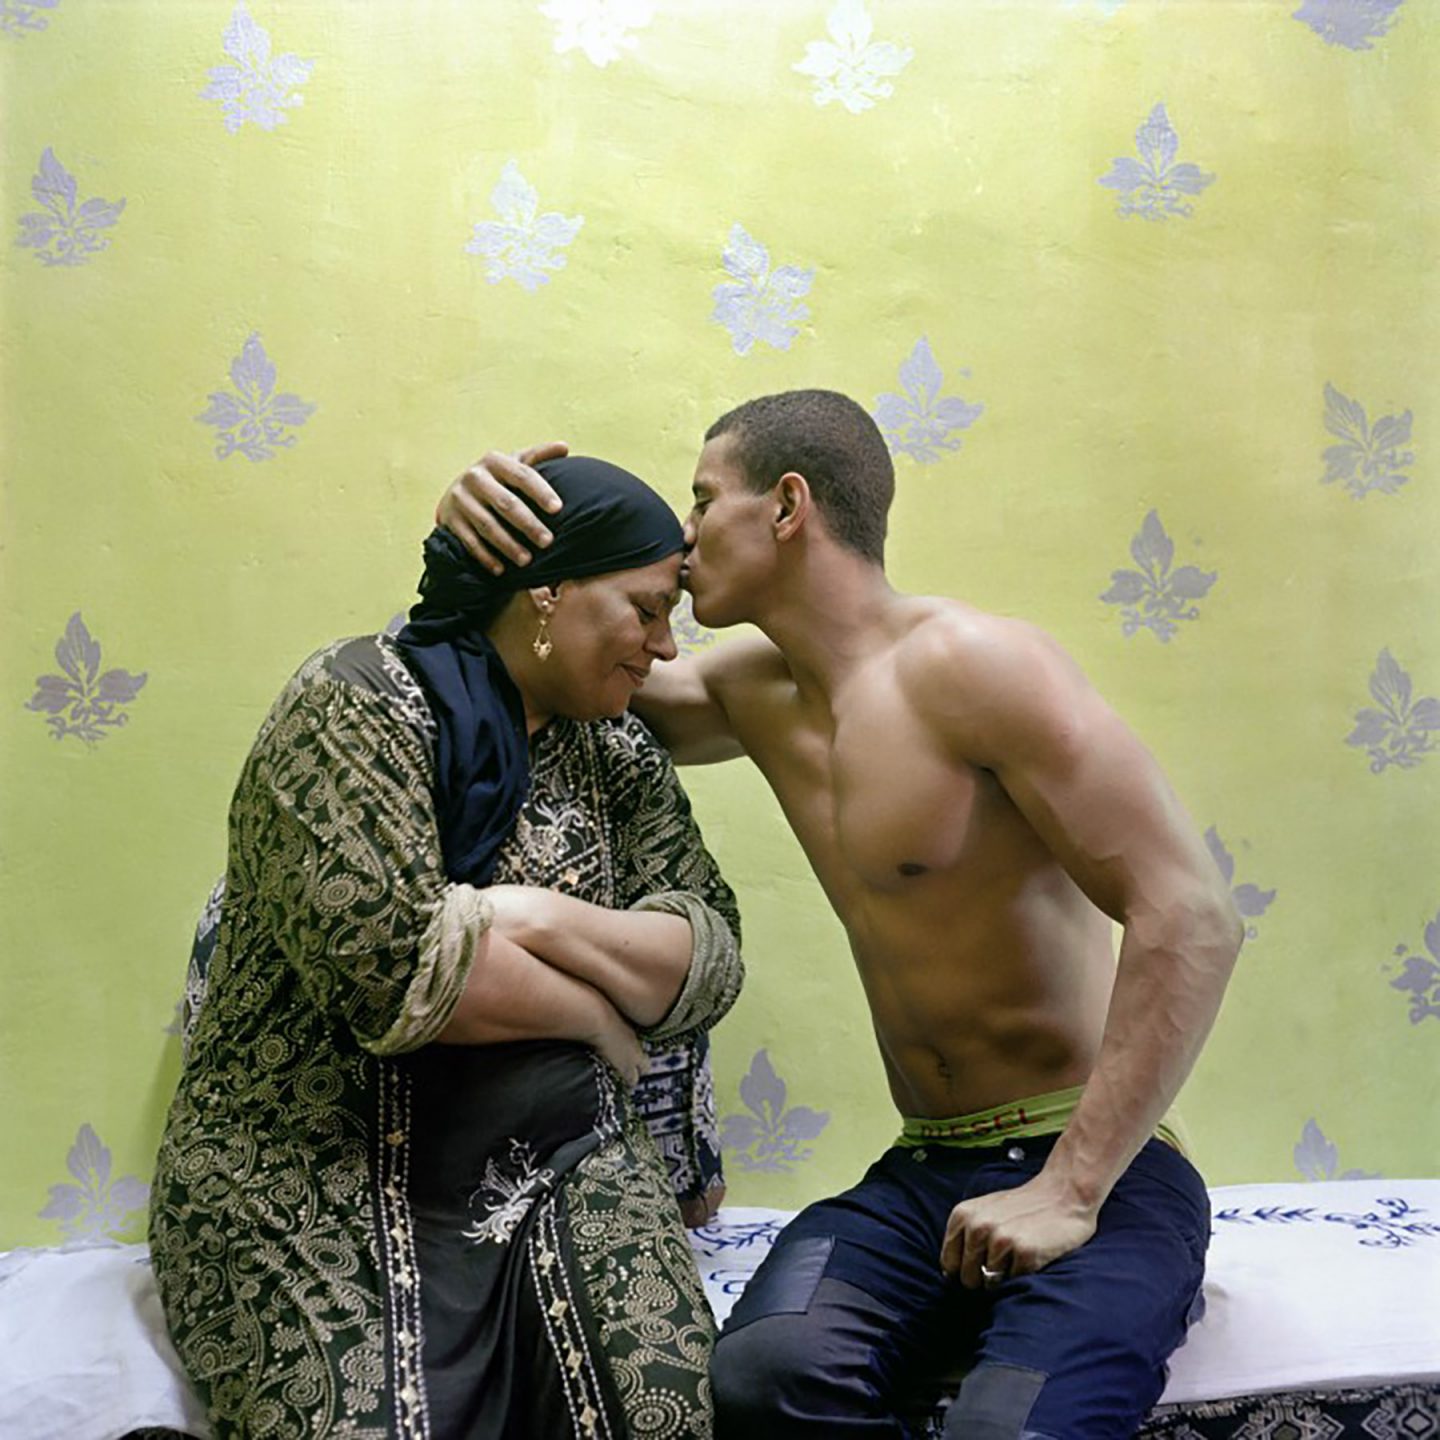 iGNANT-Photography-Denis-Dailleux-Egypt-Mother-And-Son-15